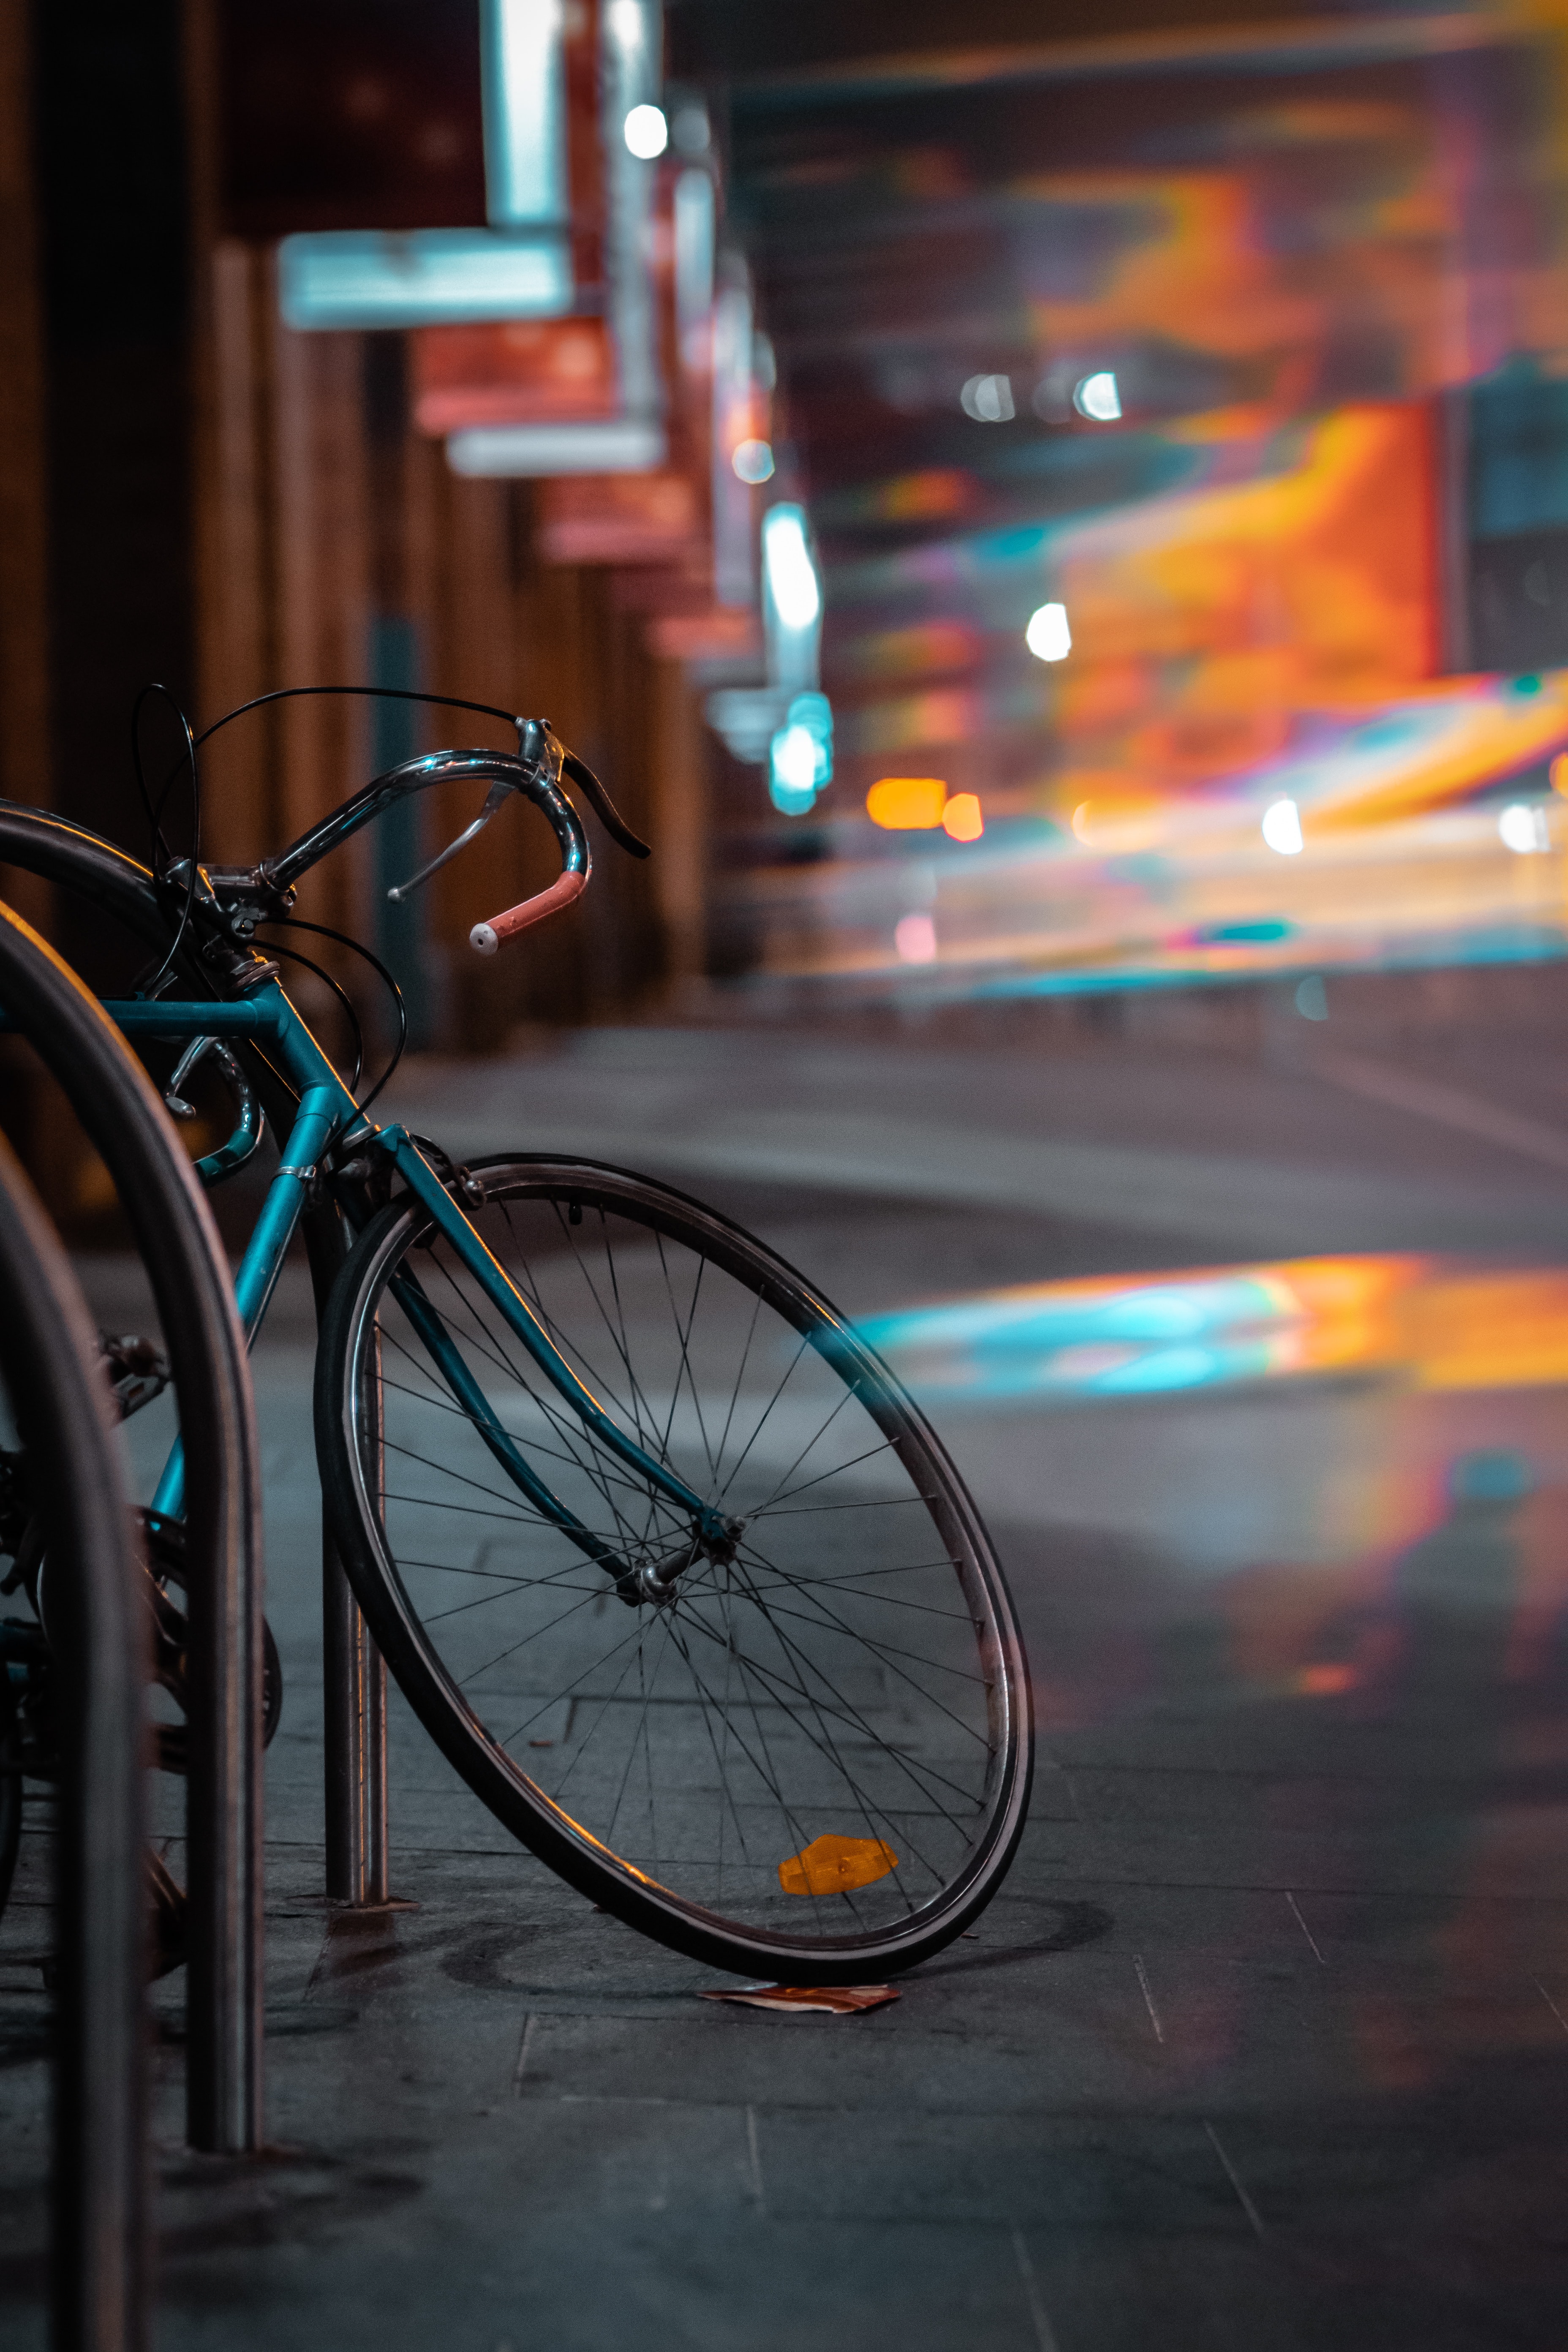 miscellaneous, bicycle, blur, transport, glare, miscellanea, smooth, evening, wheels